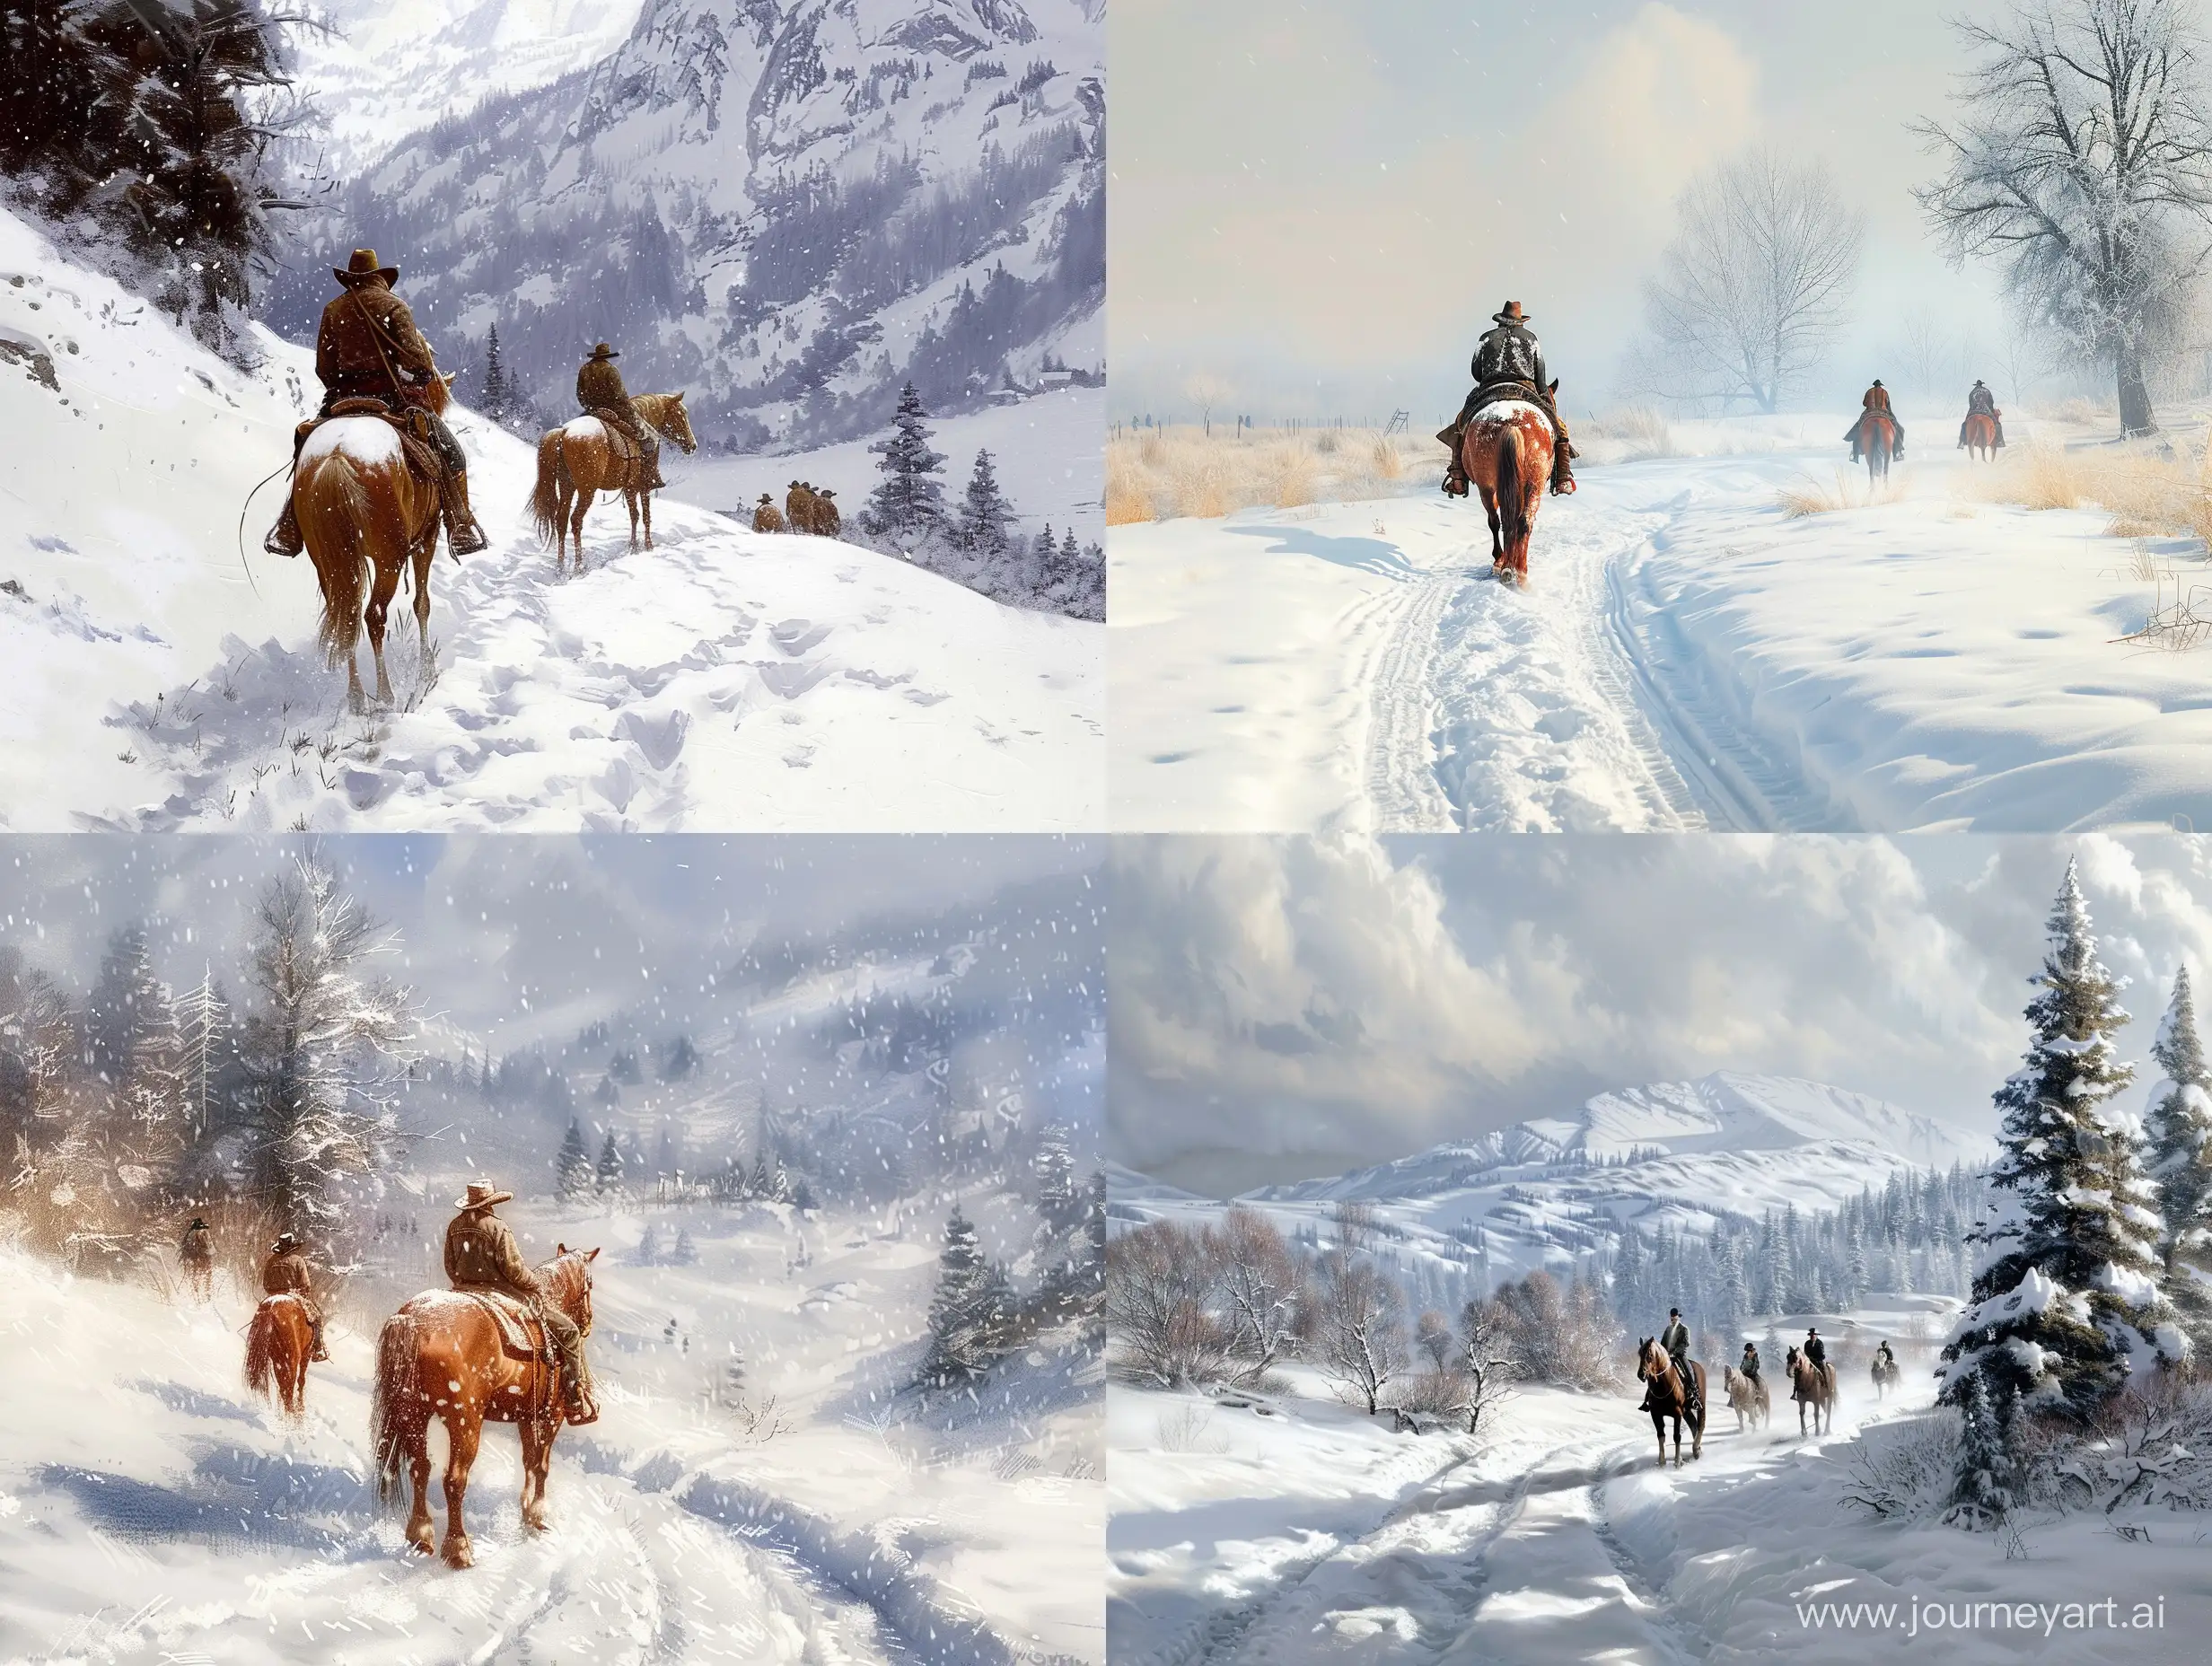 Realistic-Portrait-of-People-and-Horse-in-Western-Snowy-Landscape